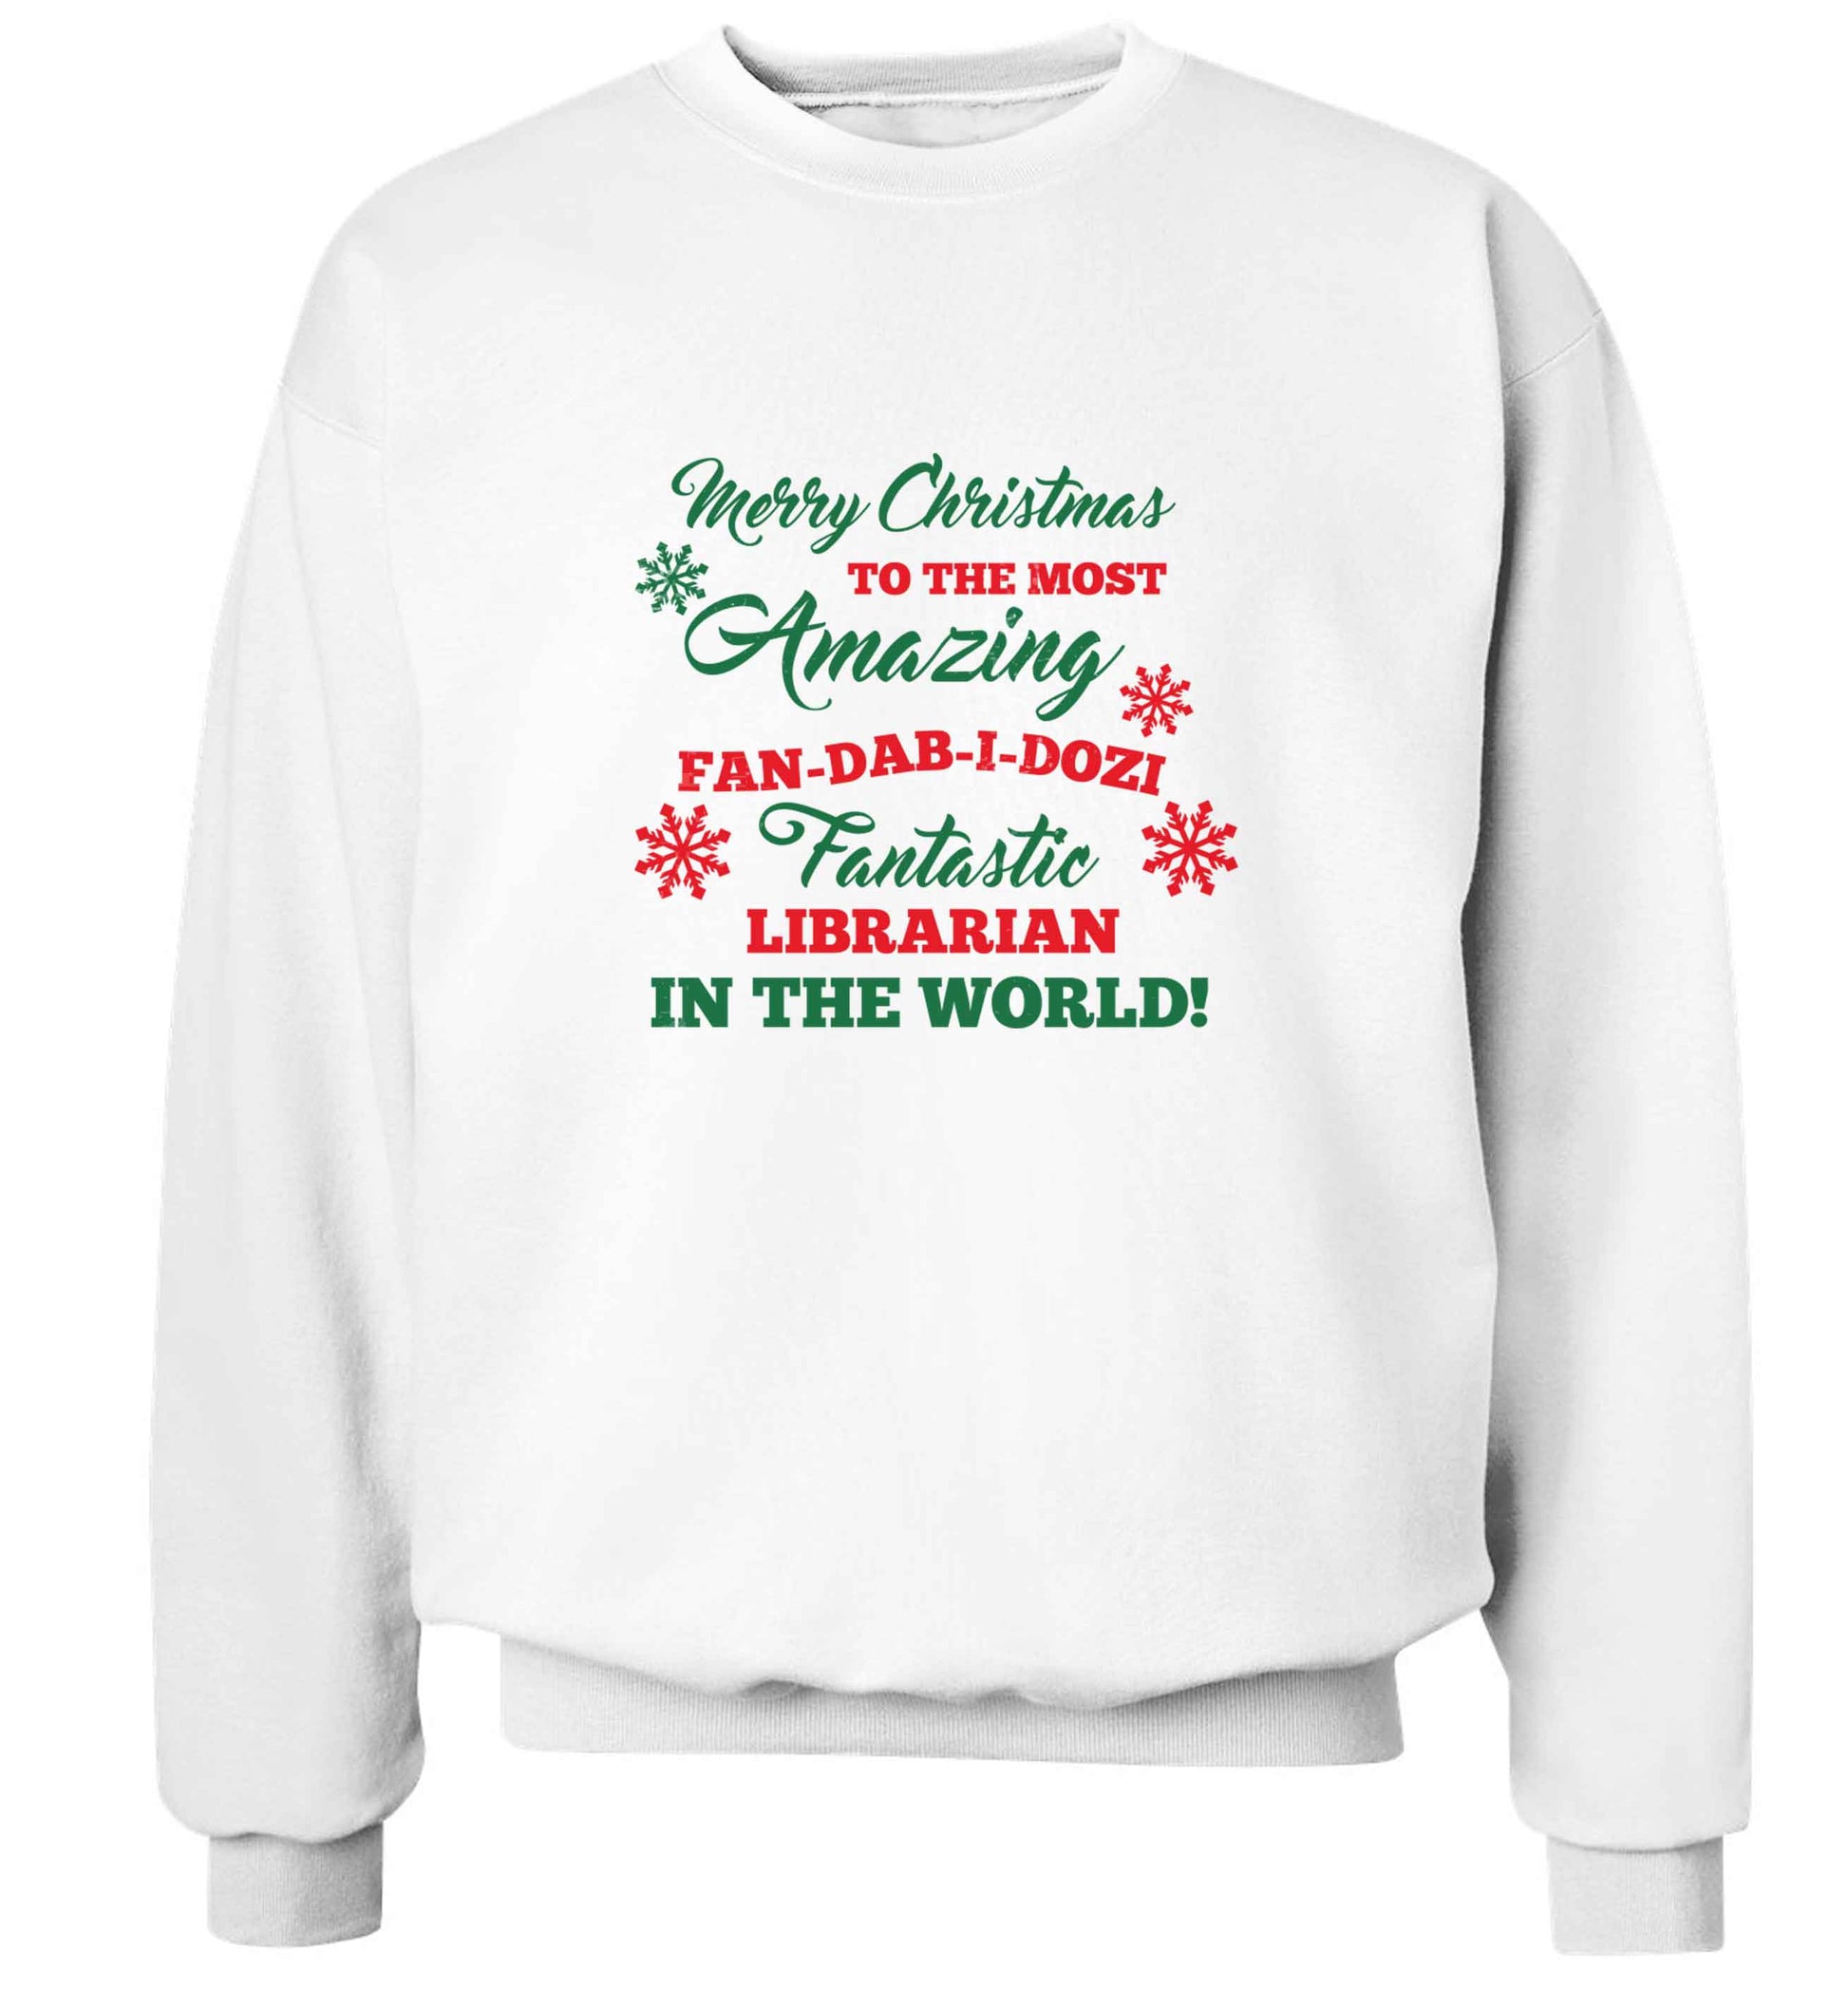 Merry Christmas to the most amazing librarian in the world! adult's unisex white sweater 2XL